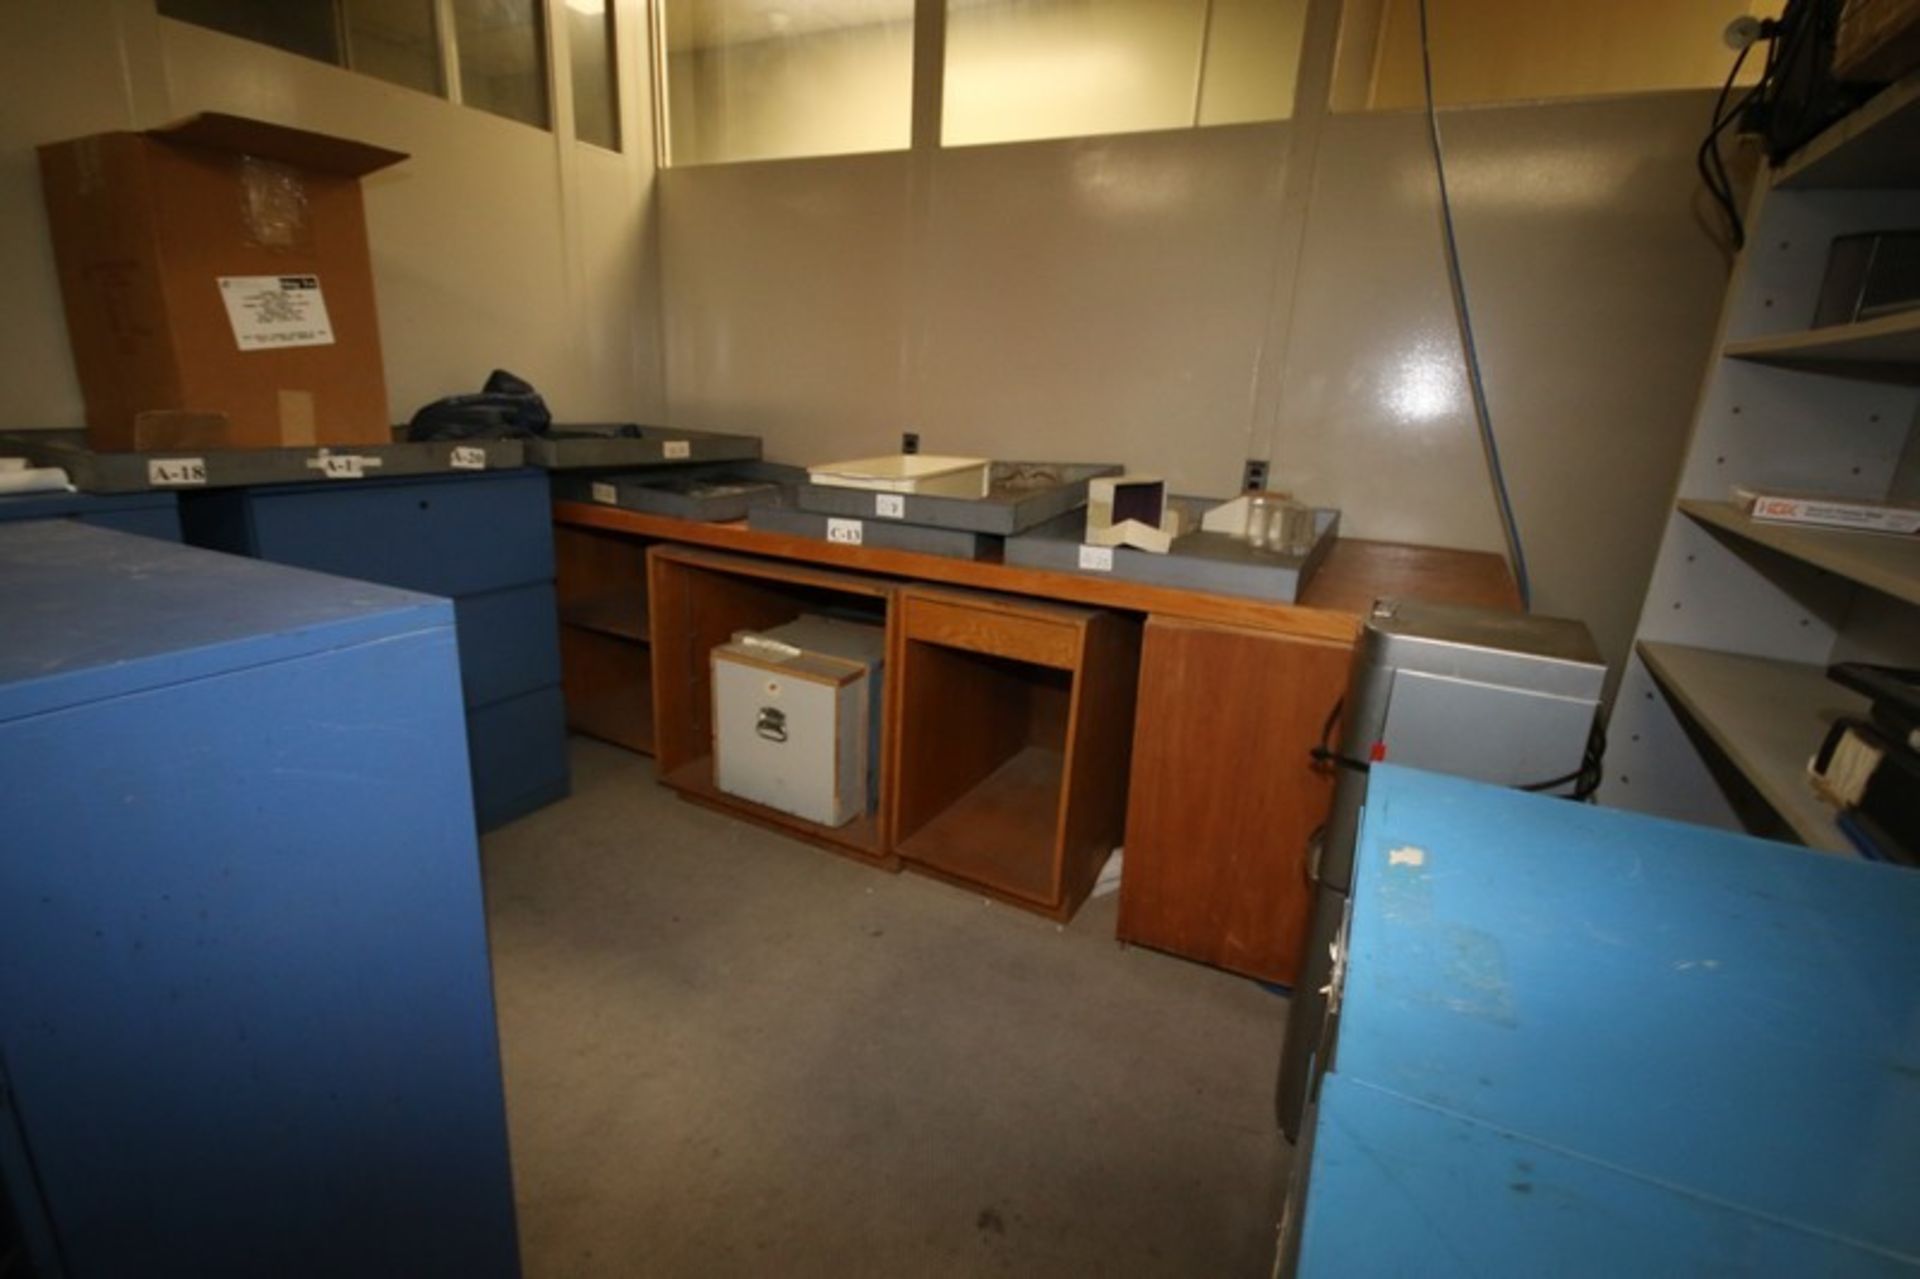 Contents of Room, Includes Spare Cabinets, Horizontal Filing Cabinets, Shelving, Rolling Chair, - Image 2 of 3